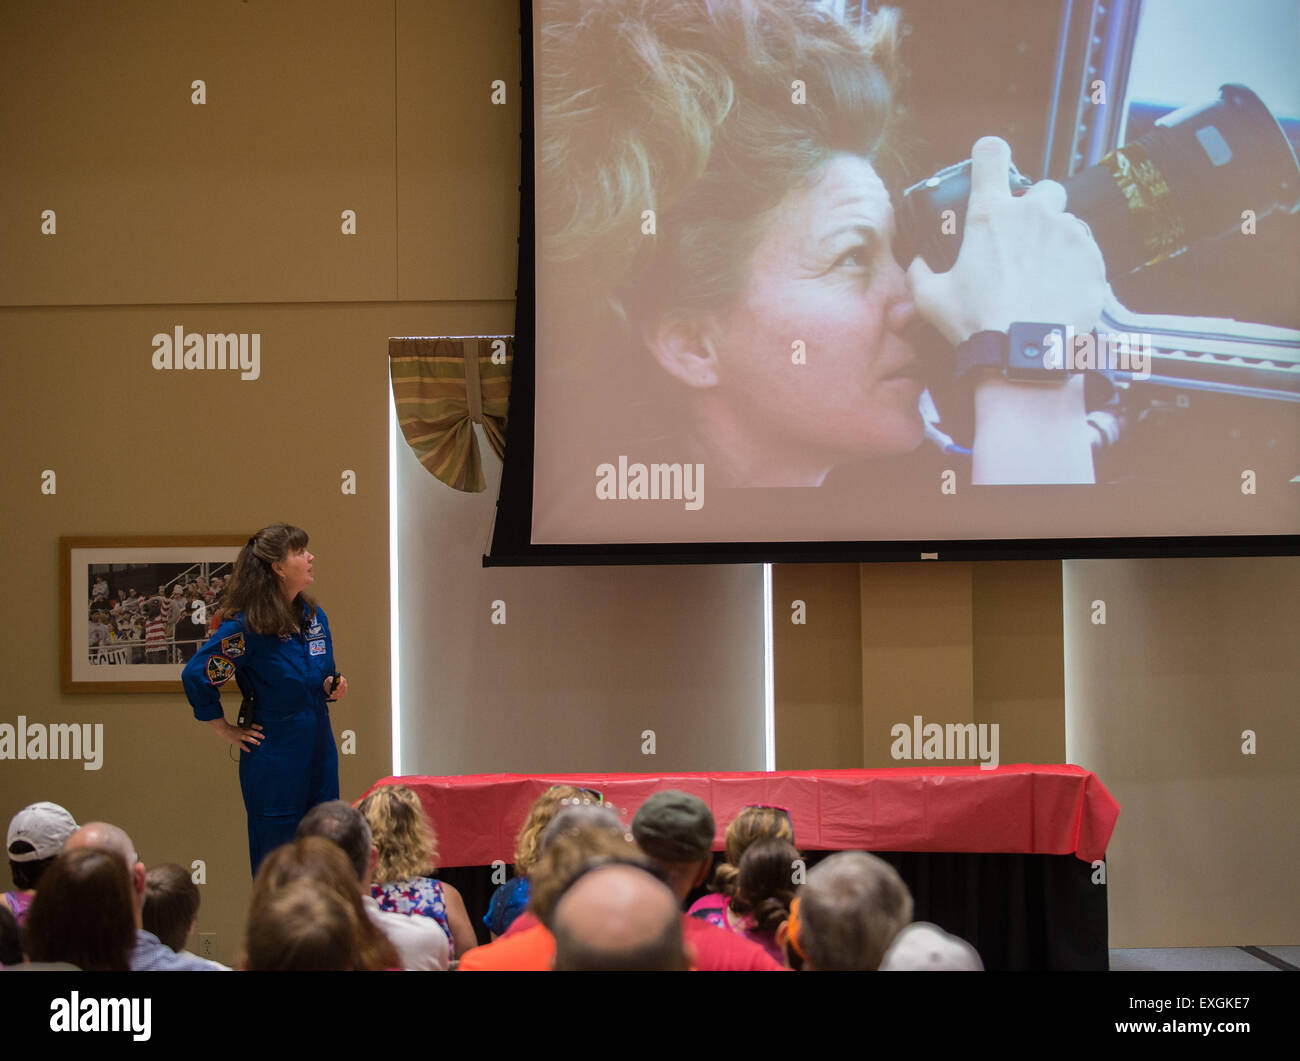 NASA astronaut Cady Coleman speaks to attendees of the TouchTomorrow Festival, held in conjunction with the 2015 Sample Return Robot Challenge, Saturday, June 13, 2015 at the Worcester Polytechnic Institute (WPI) in Worcester, Mass.  Sixteen teams competed for a $1.5 million NASA prize purse. Teams will be required to demonstrate autonomous robots that can locate and collect samples from a wide and varied terrain, operating without human control. The objective of this NASA-WPI Centennial Challenge is to encourage innovations in autonomous navigation and robotics technologies. Innovations stemm Stock Photo